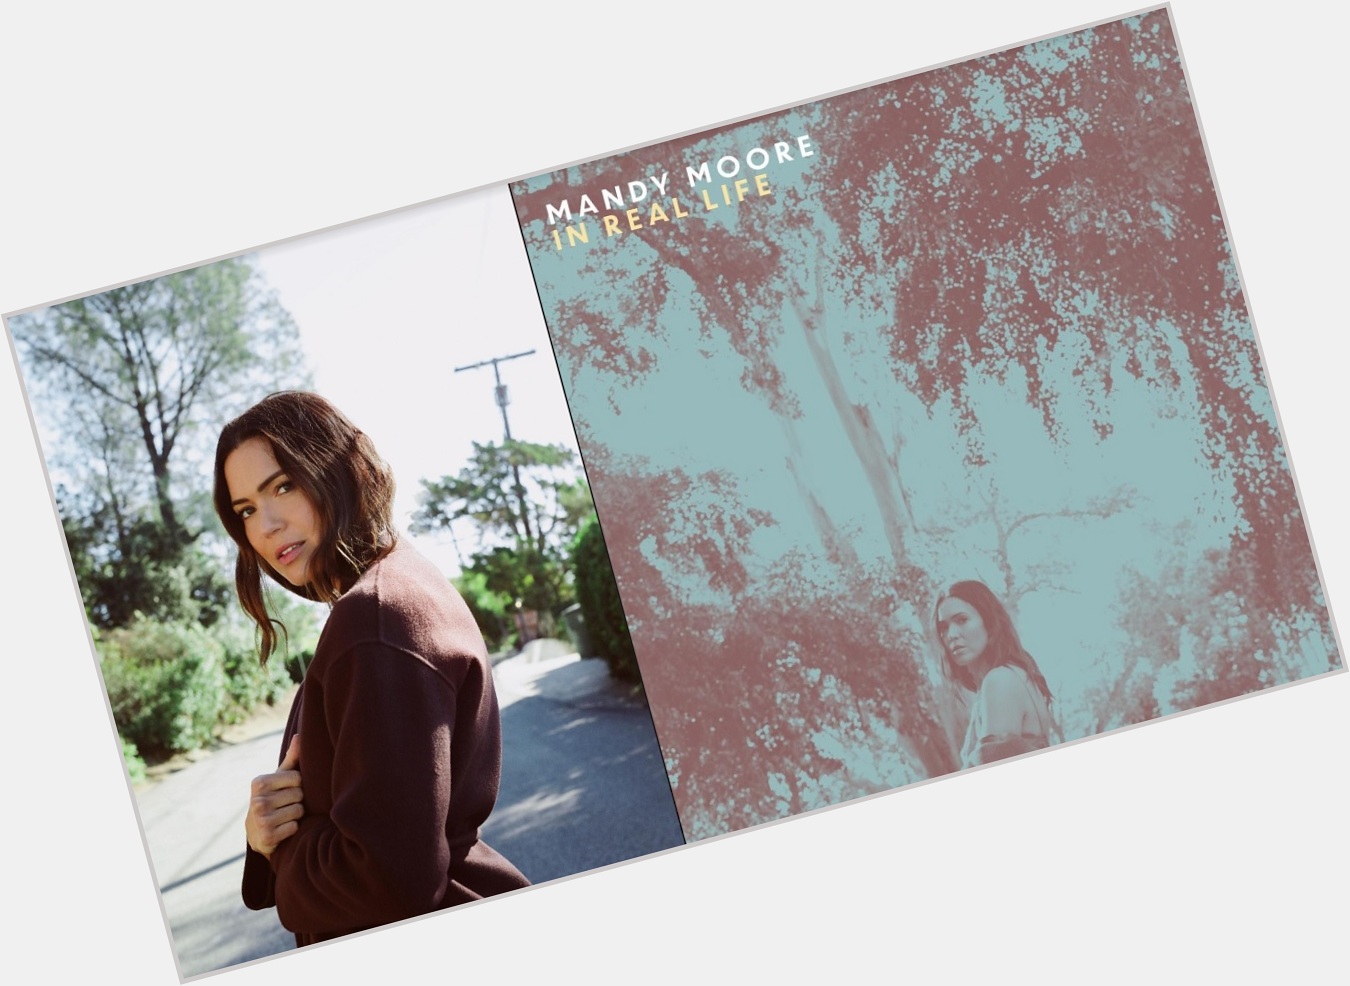 Happy Birthday Mandy Moore...
New album \"In Real Life\" out May 13th.
Details, preview here:  